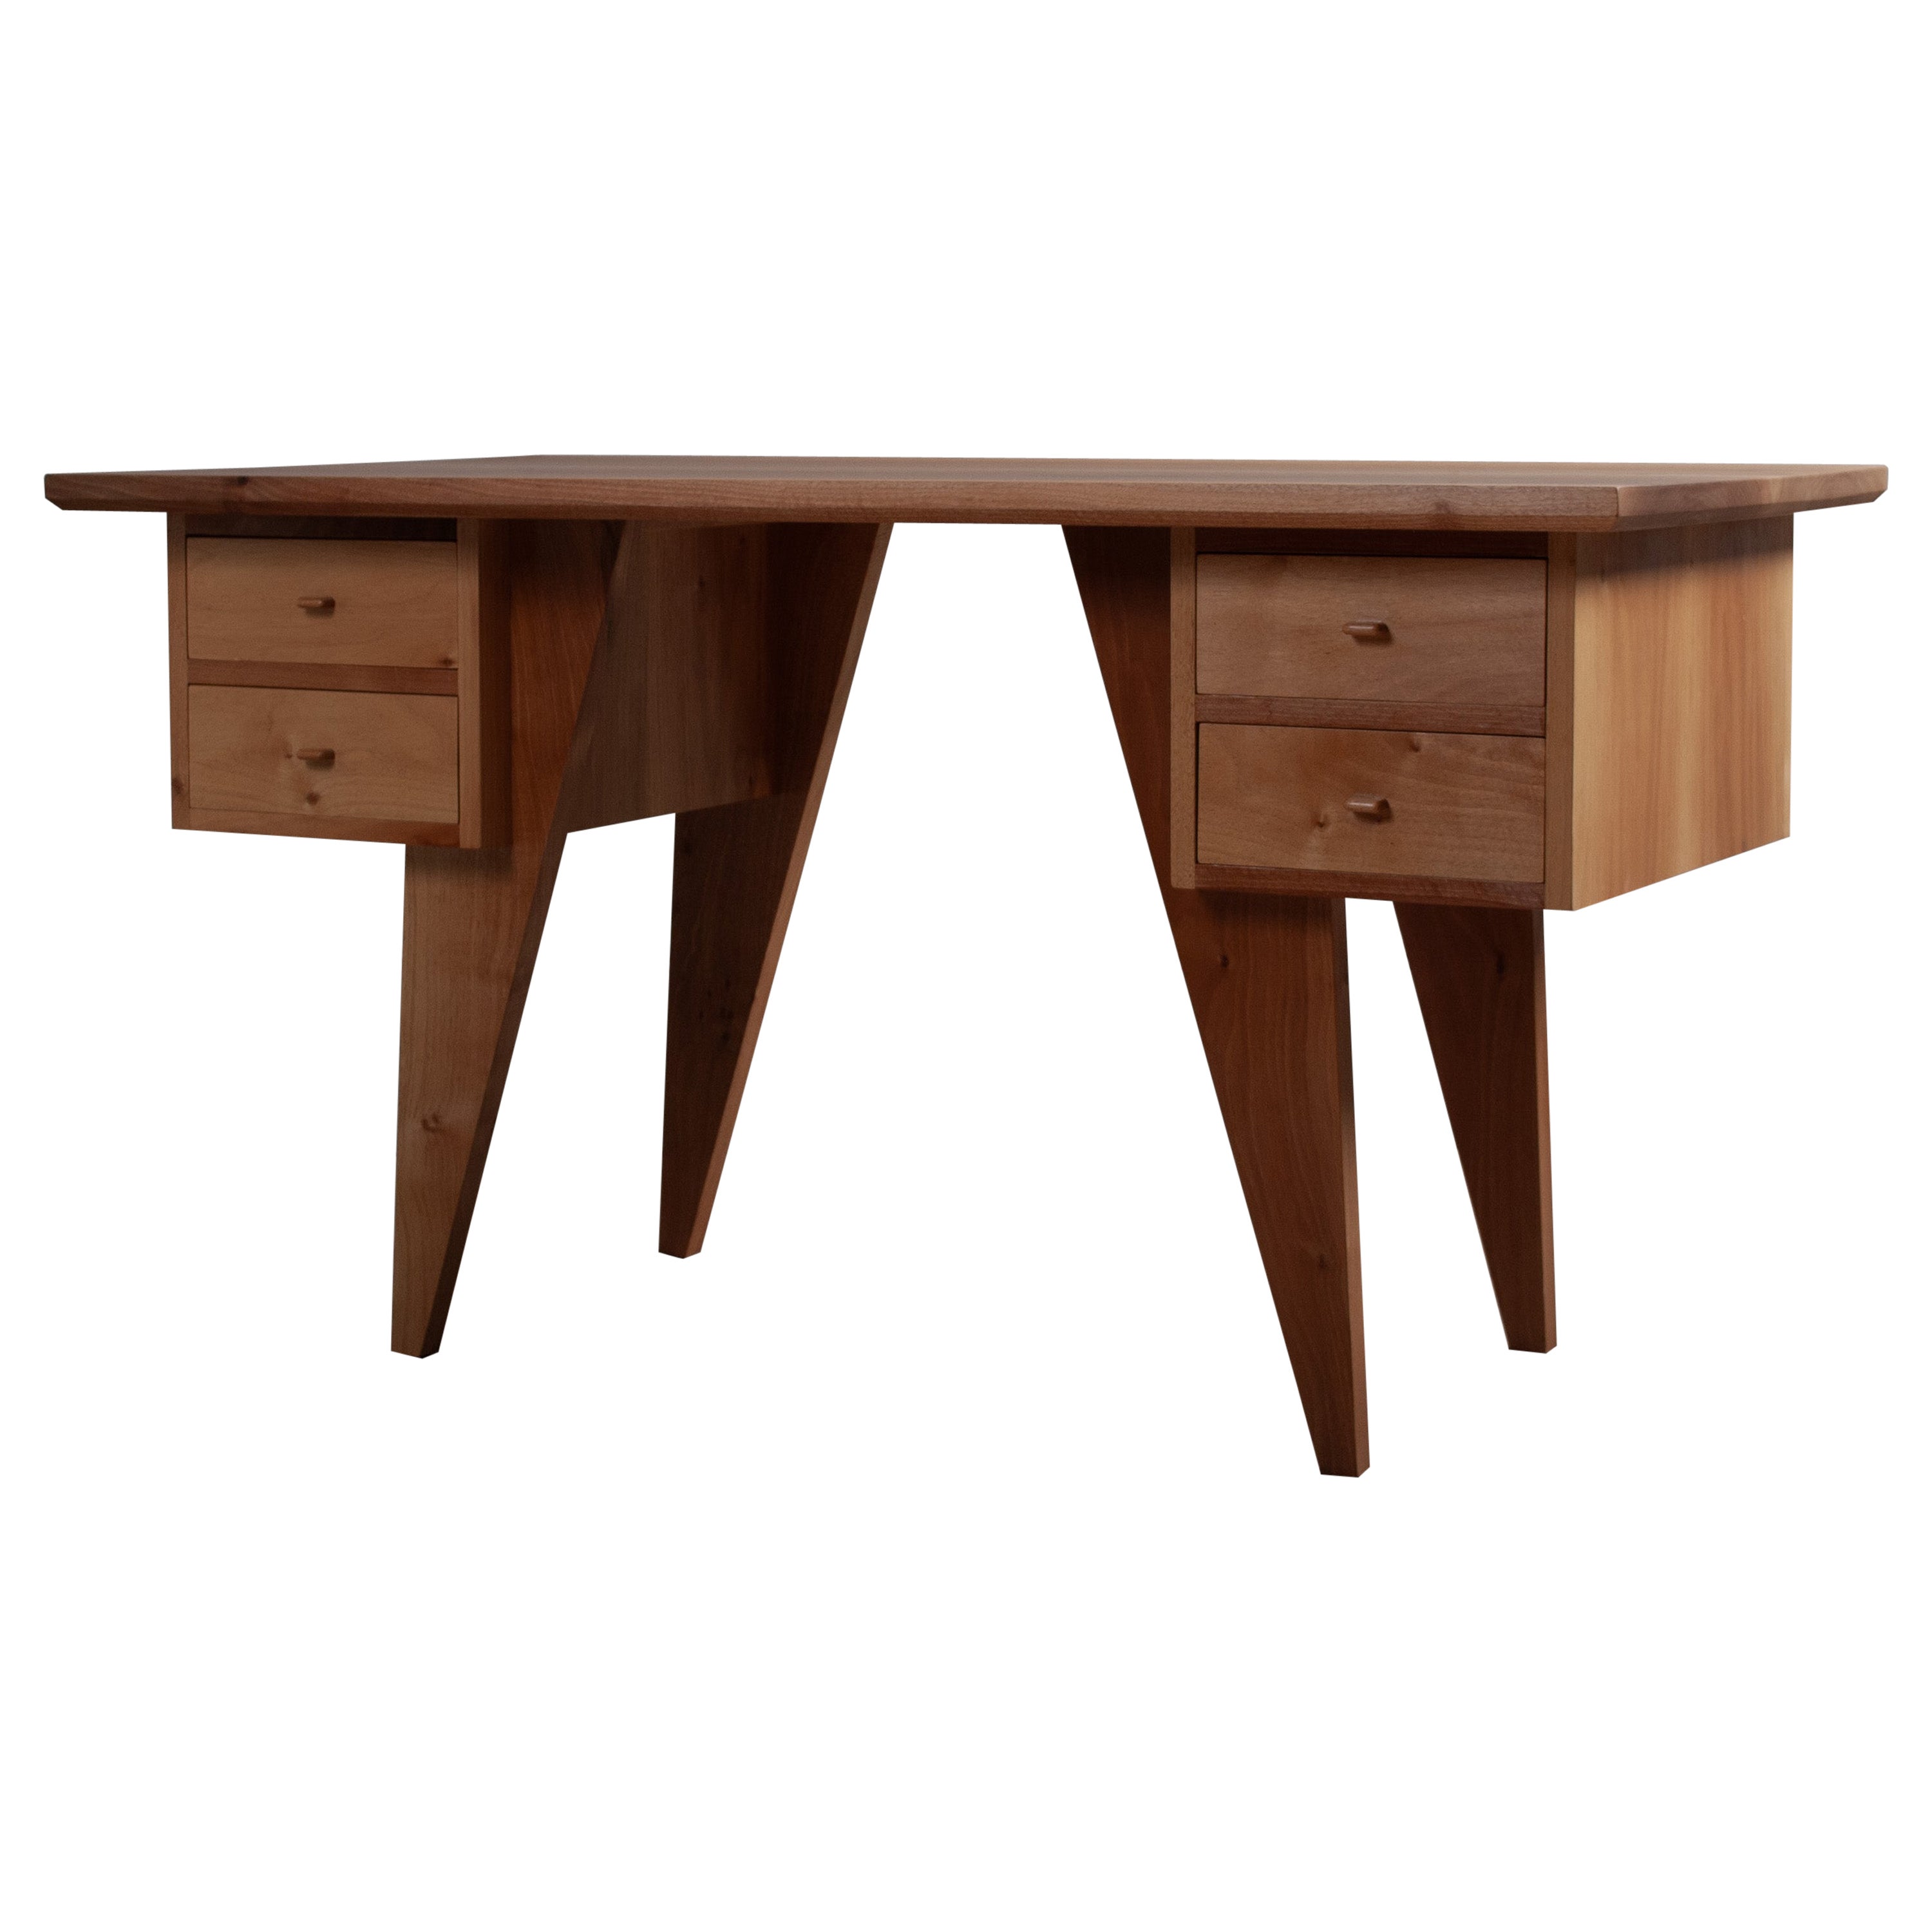 Handcrafted English Desk